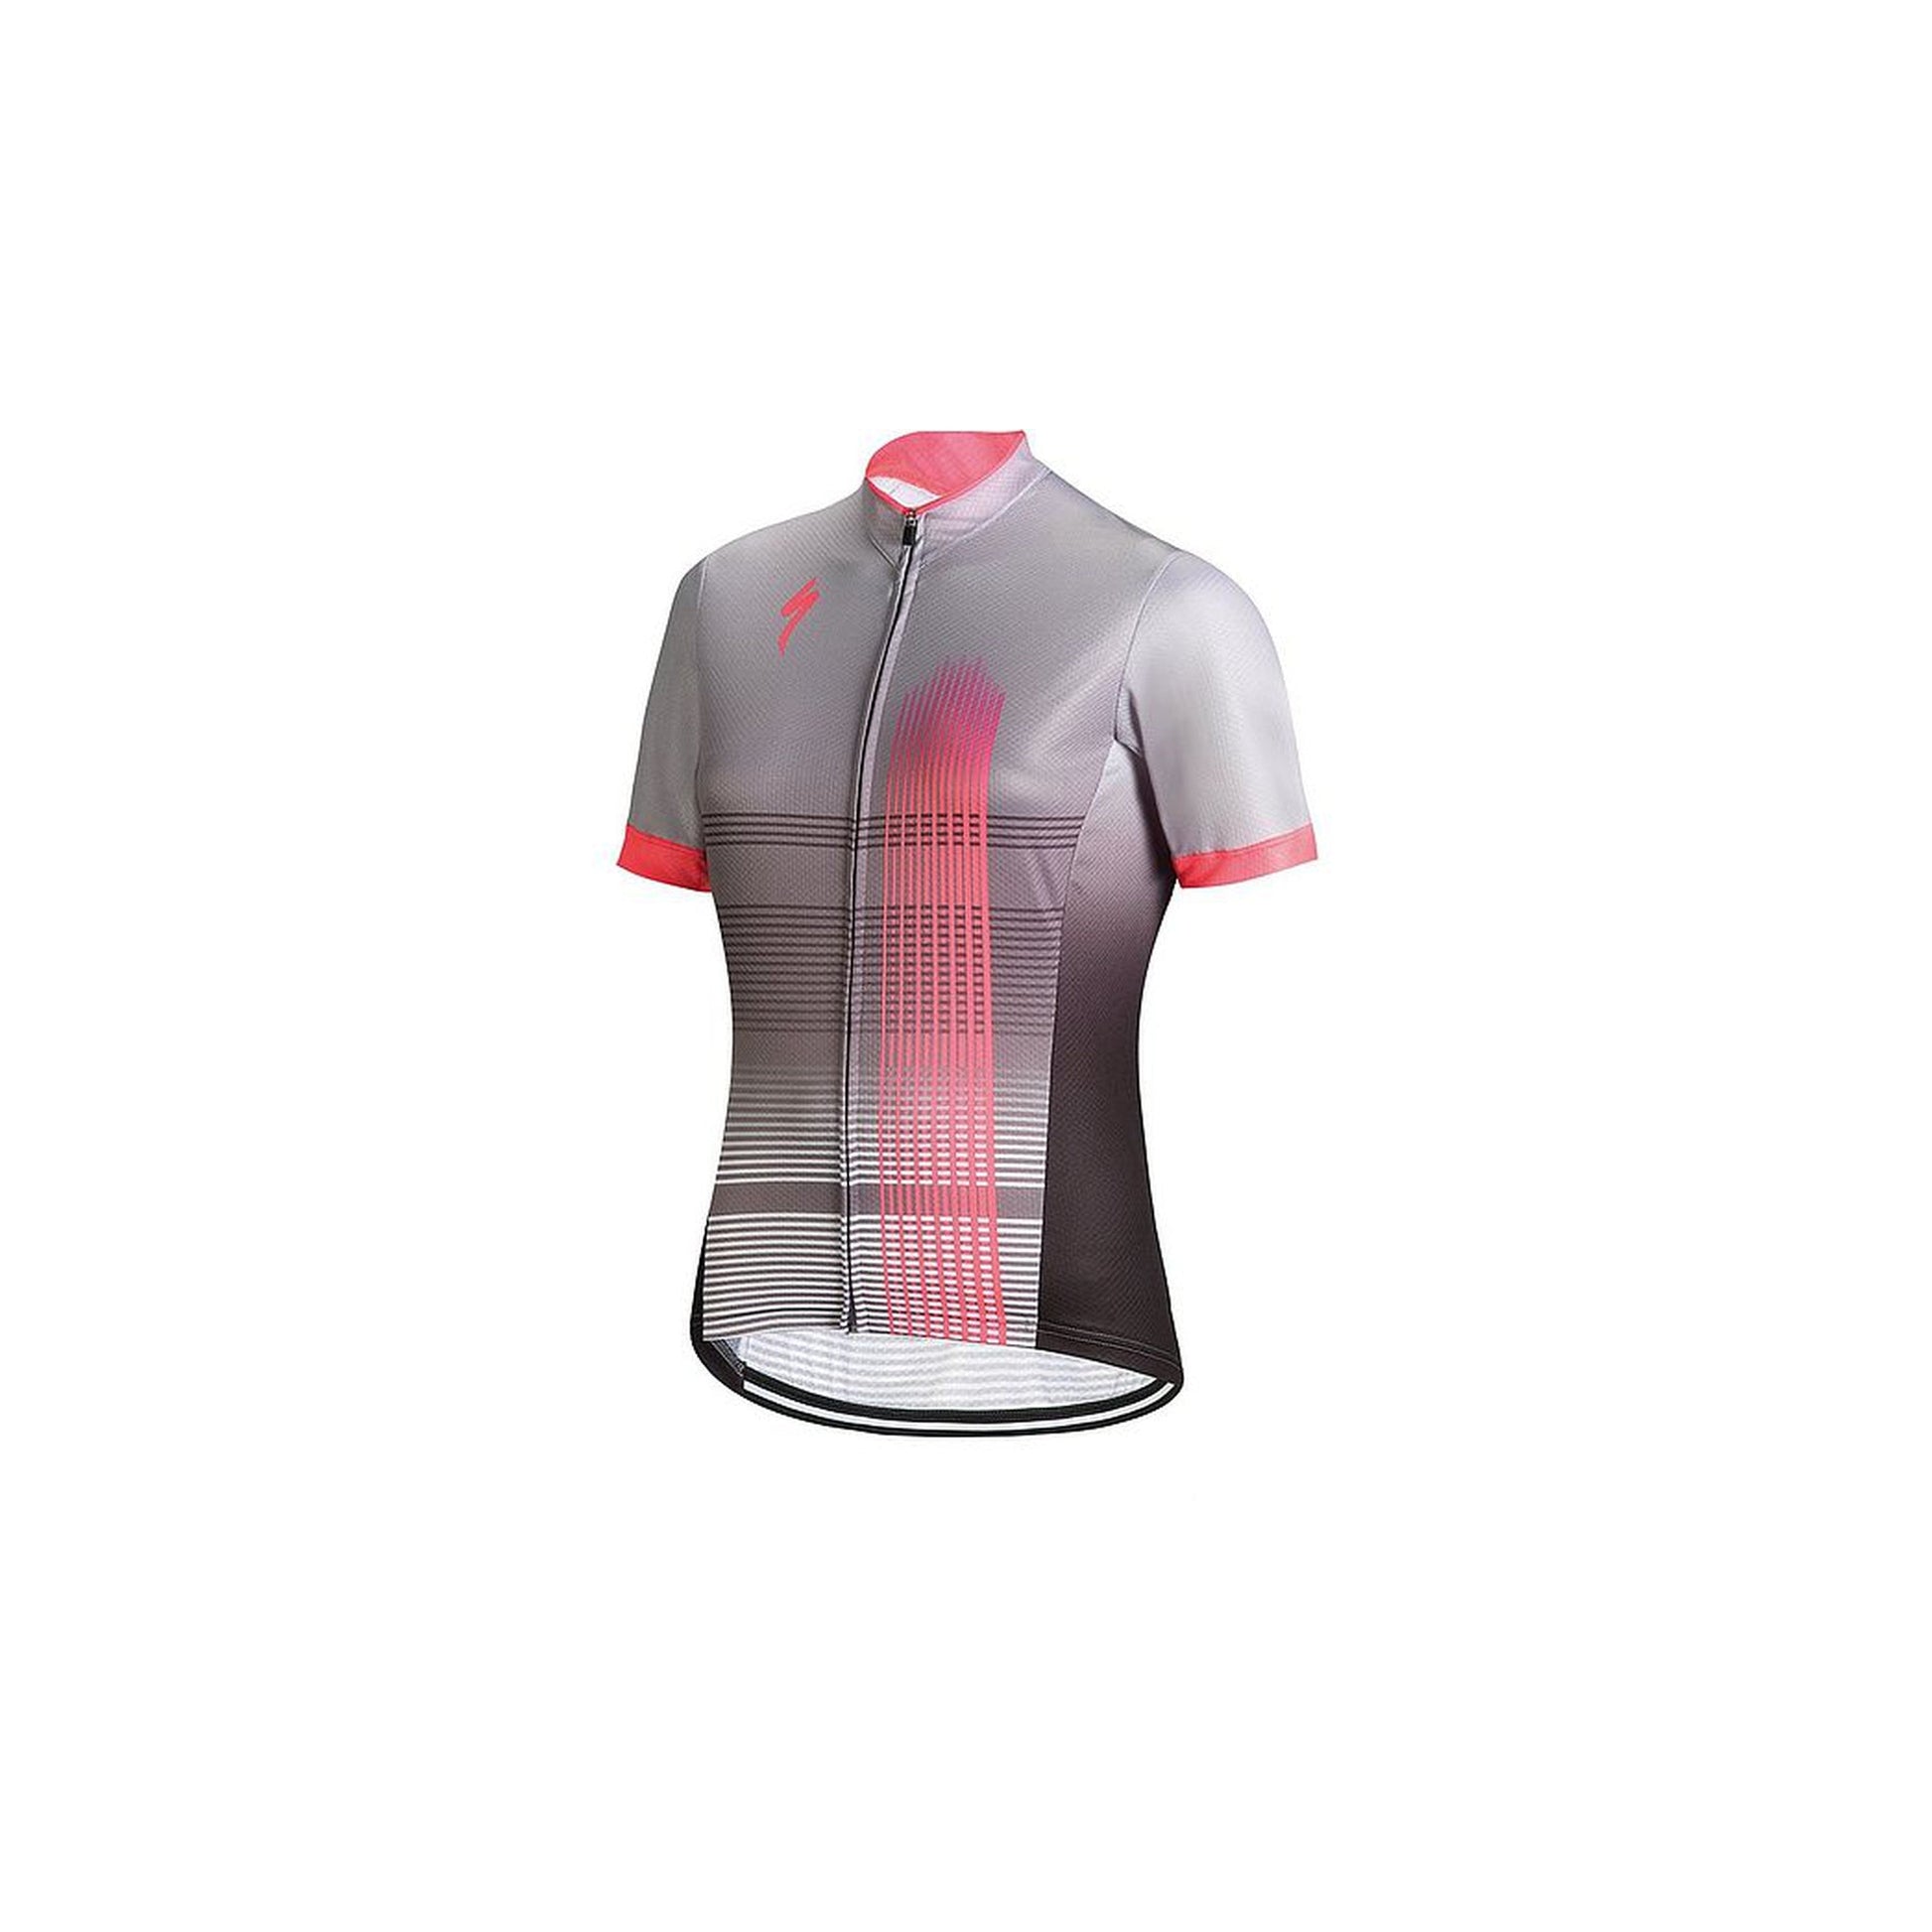 RBX COMP JERSEY SS WMN LTGRY/NEON PNK L-Bells-Cycling-Specialized